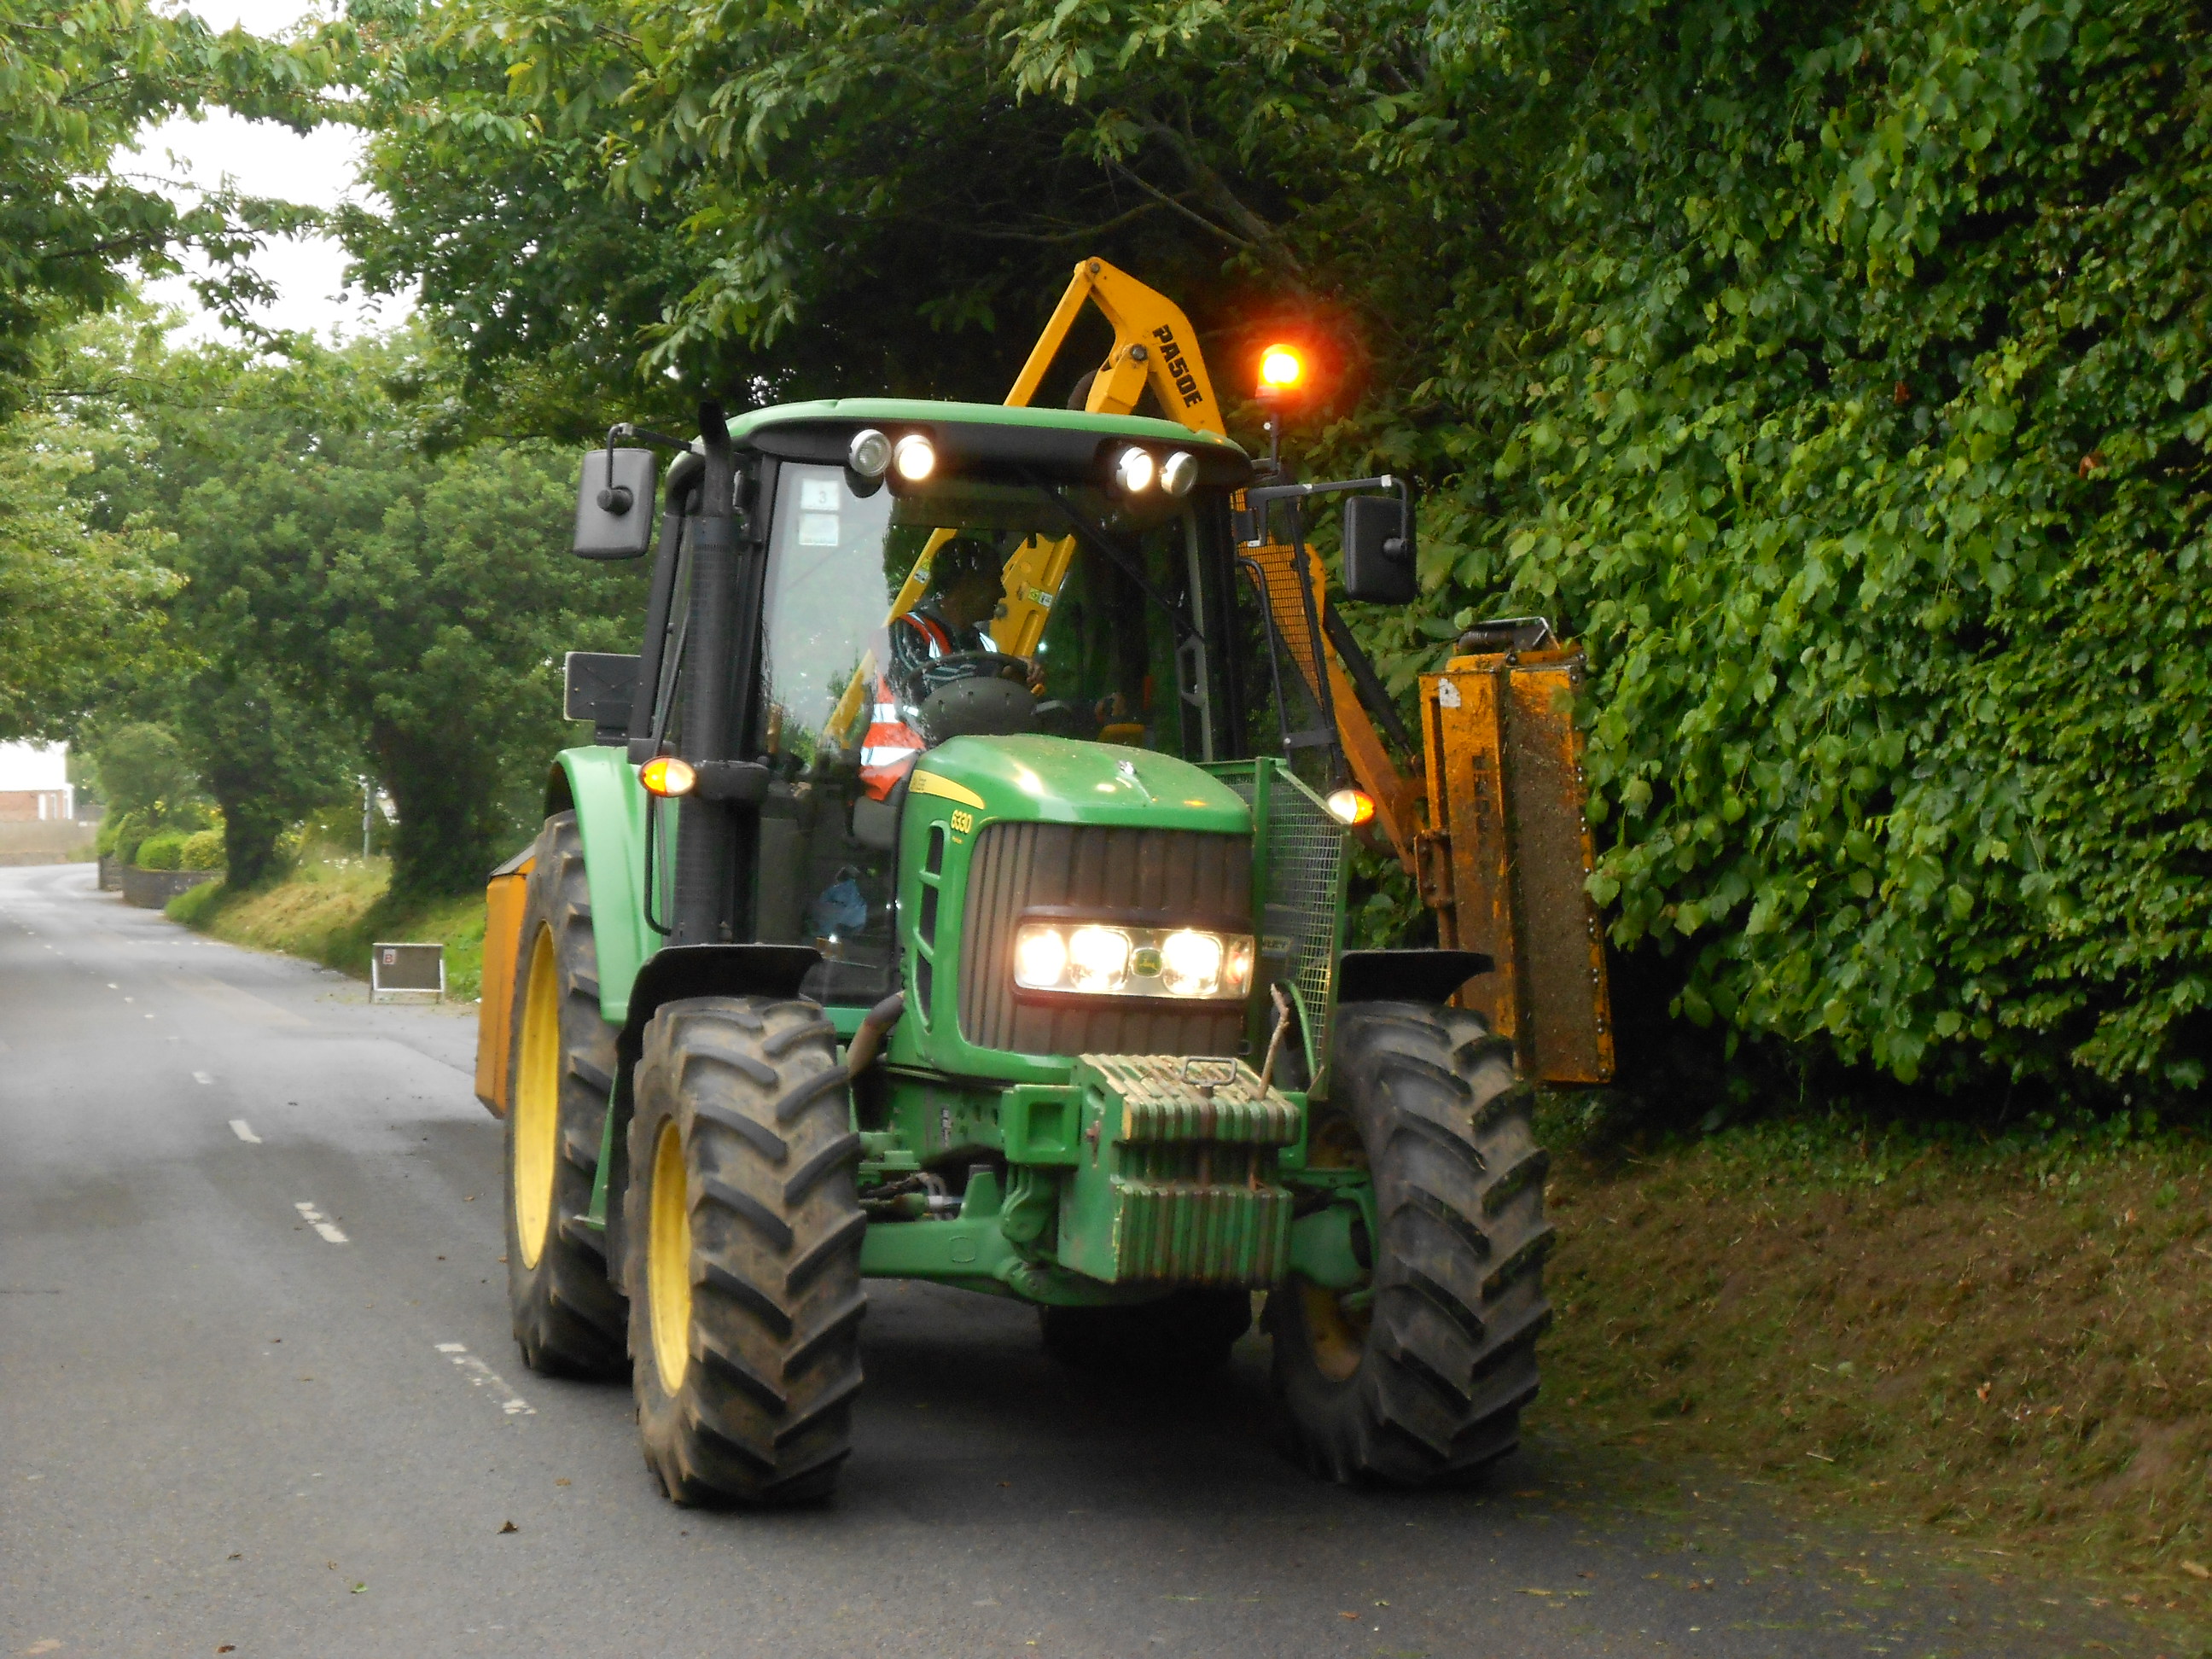 Hedge cutter in front1.JPG